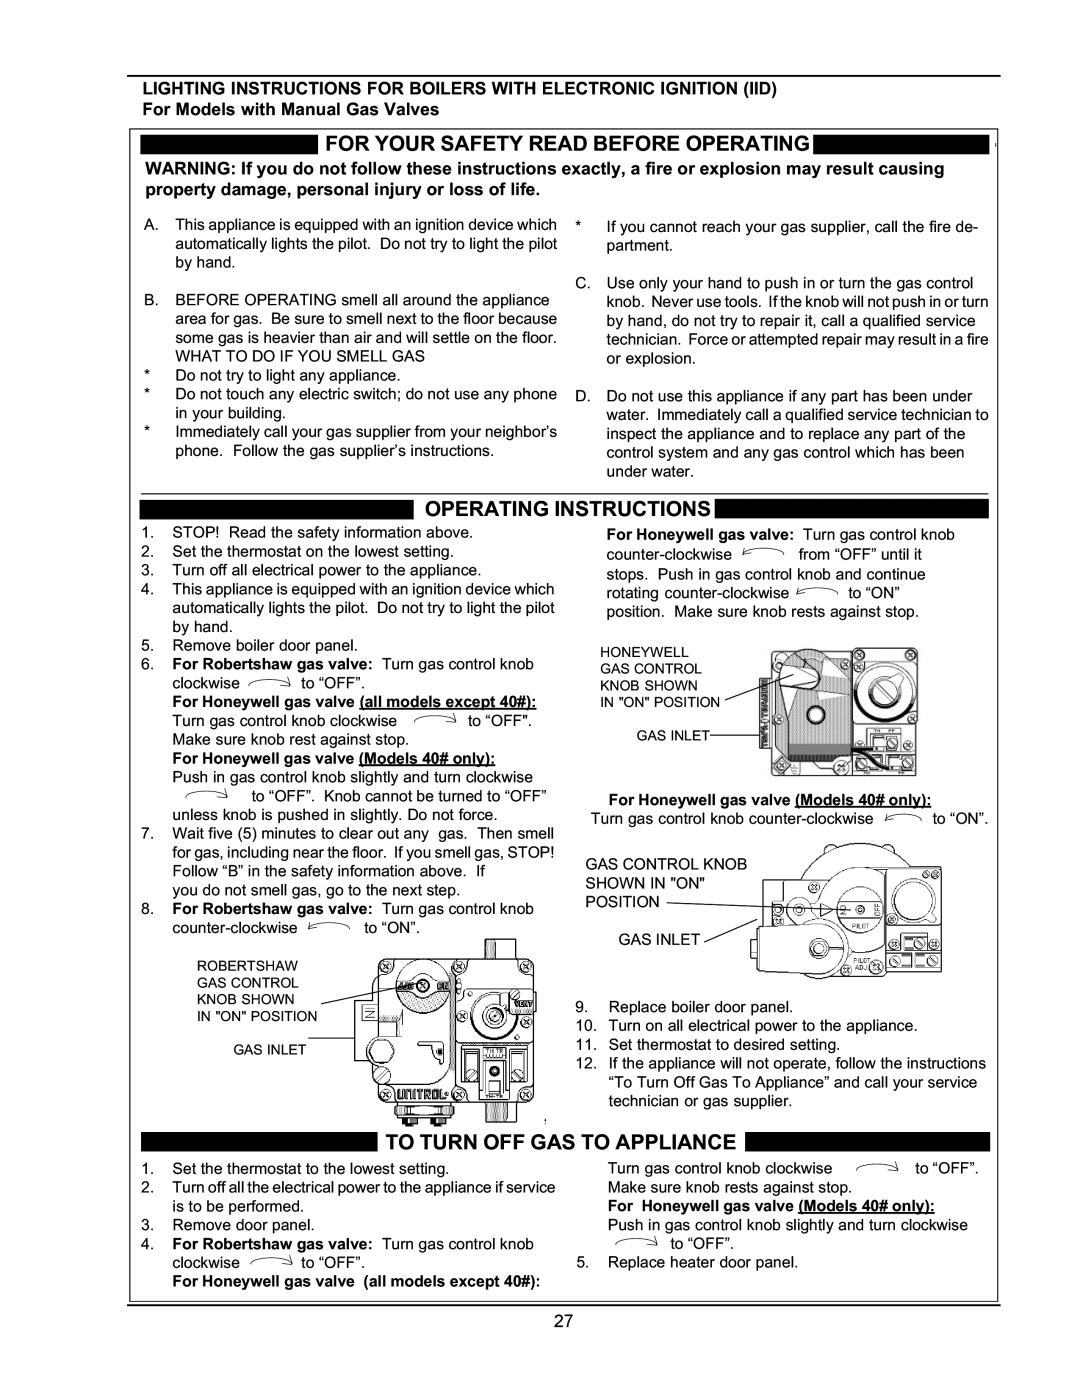 Raypak 133-4001 manual For Your Safety Read Before Operating, Operating Instructions, To Turn Off Gas To Appliance 